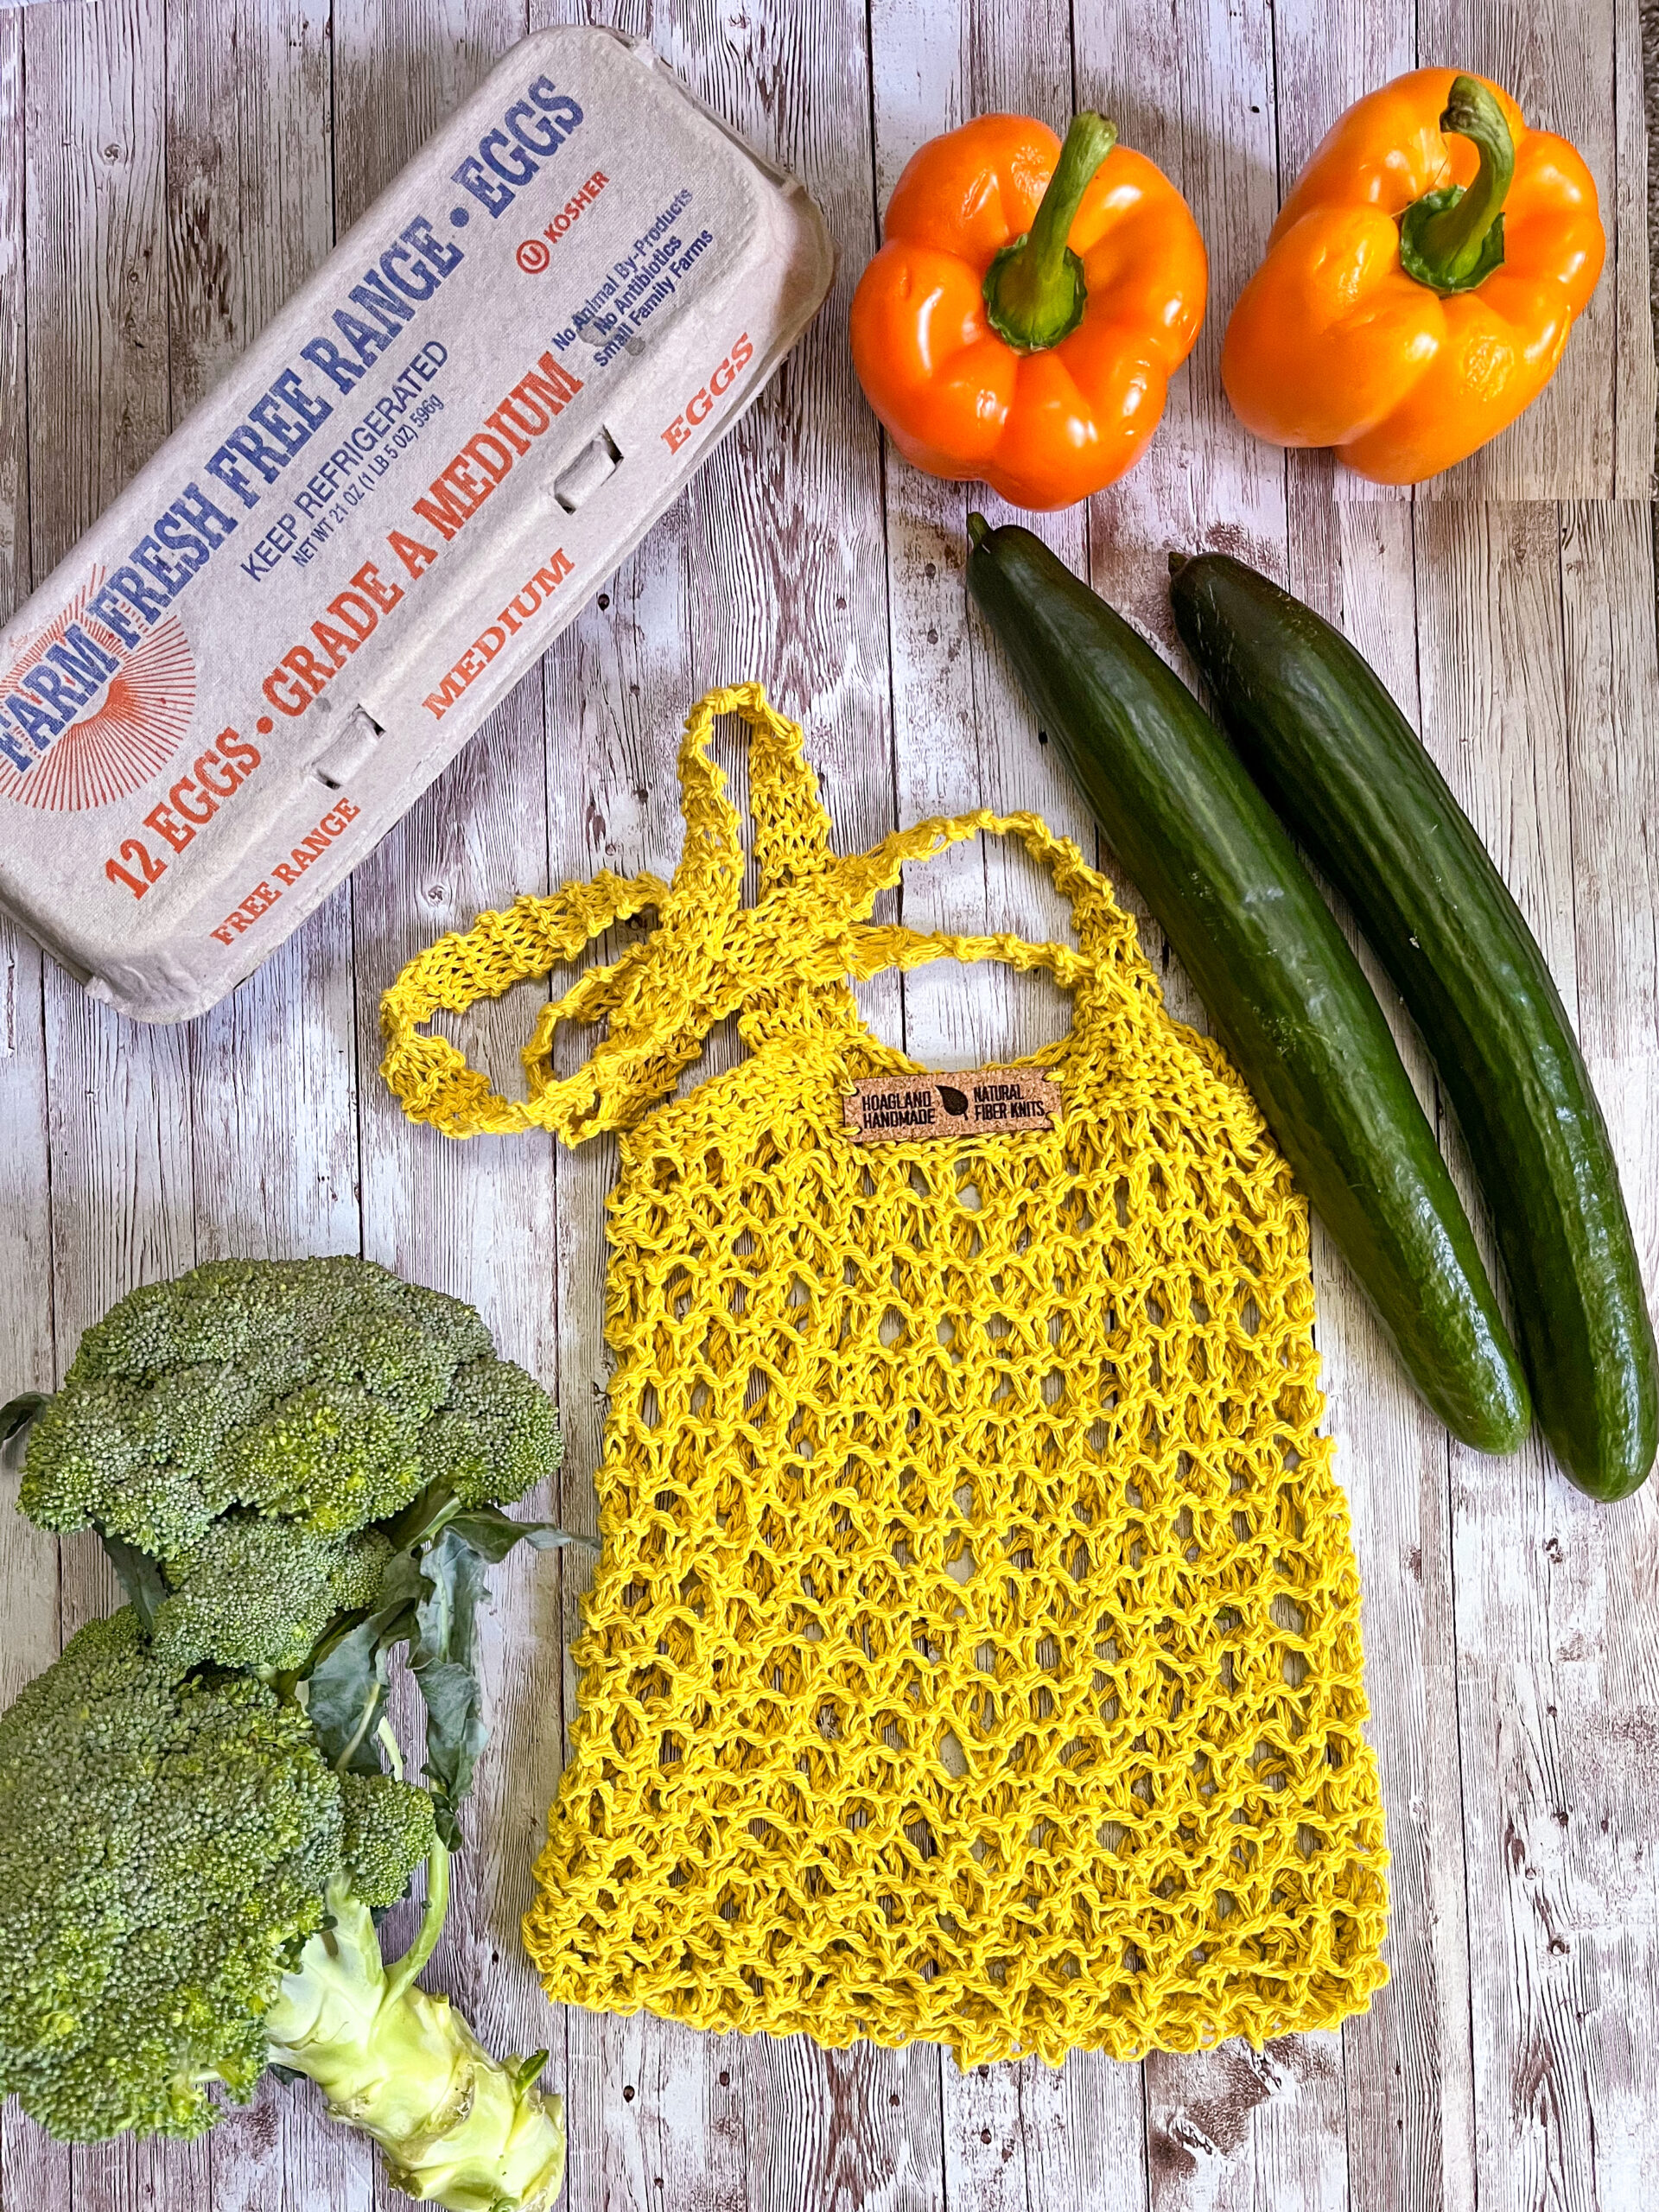 A yellow recycled cotton mesh tote bag is surrounded by a carton of farm eggs, orange bell peppers, cucumbers, and broccoli